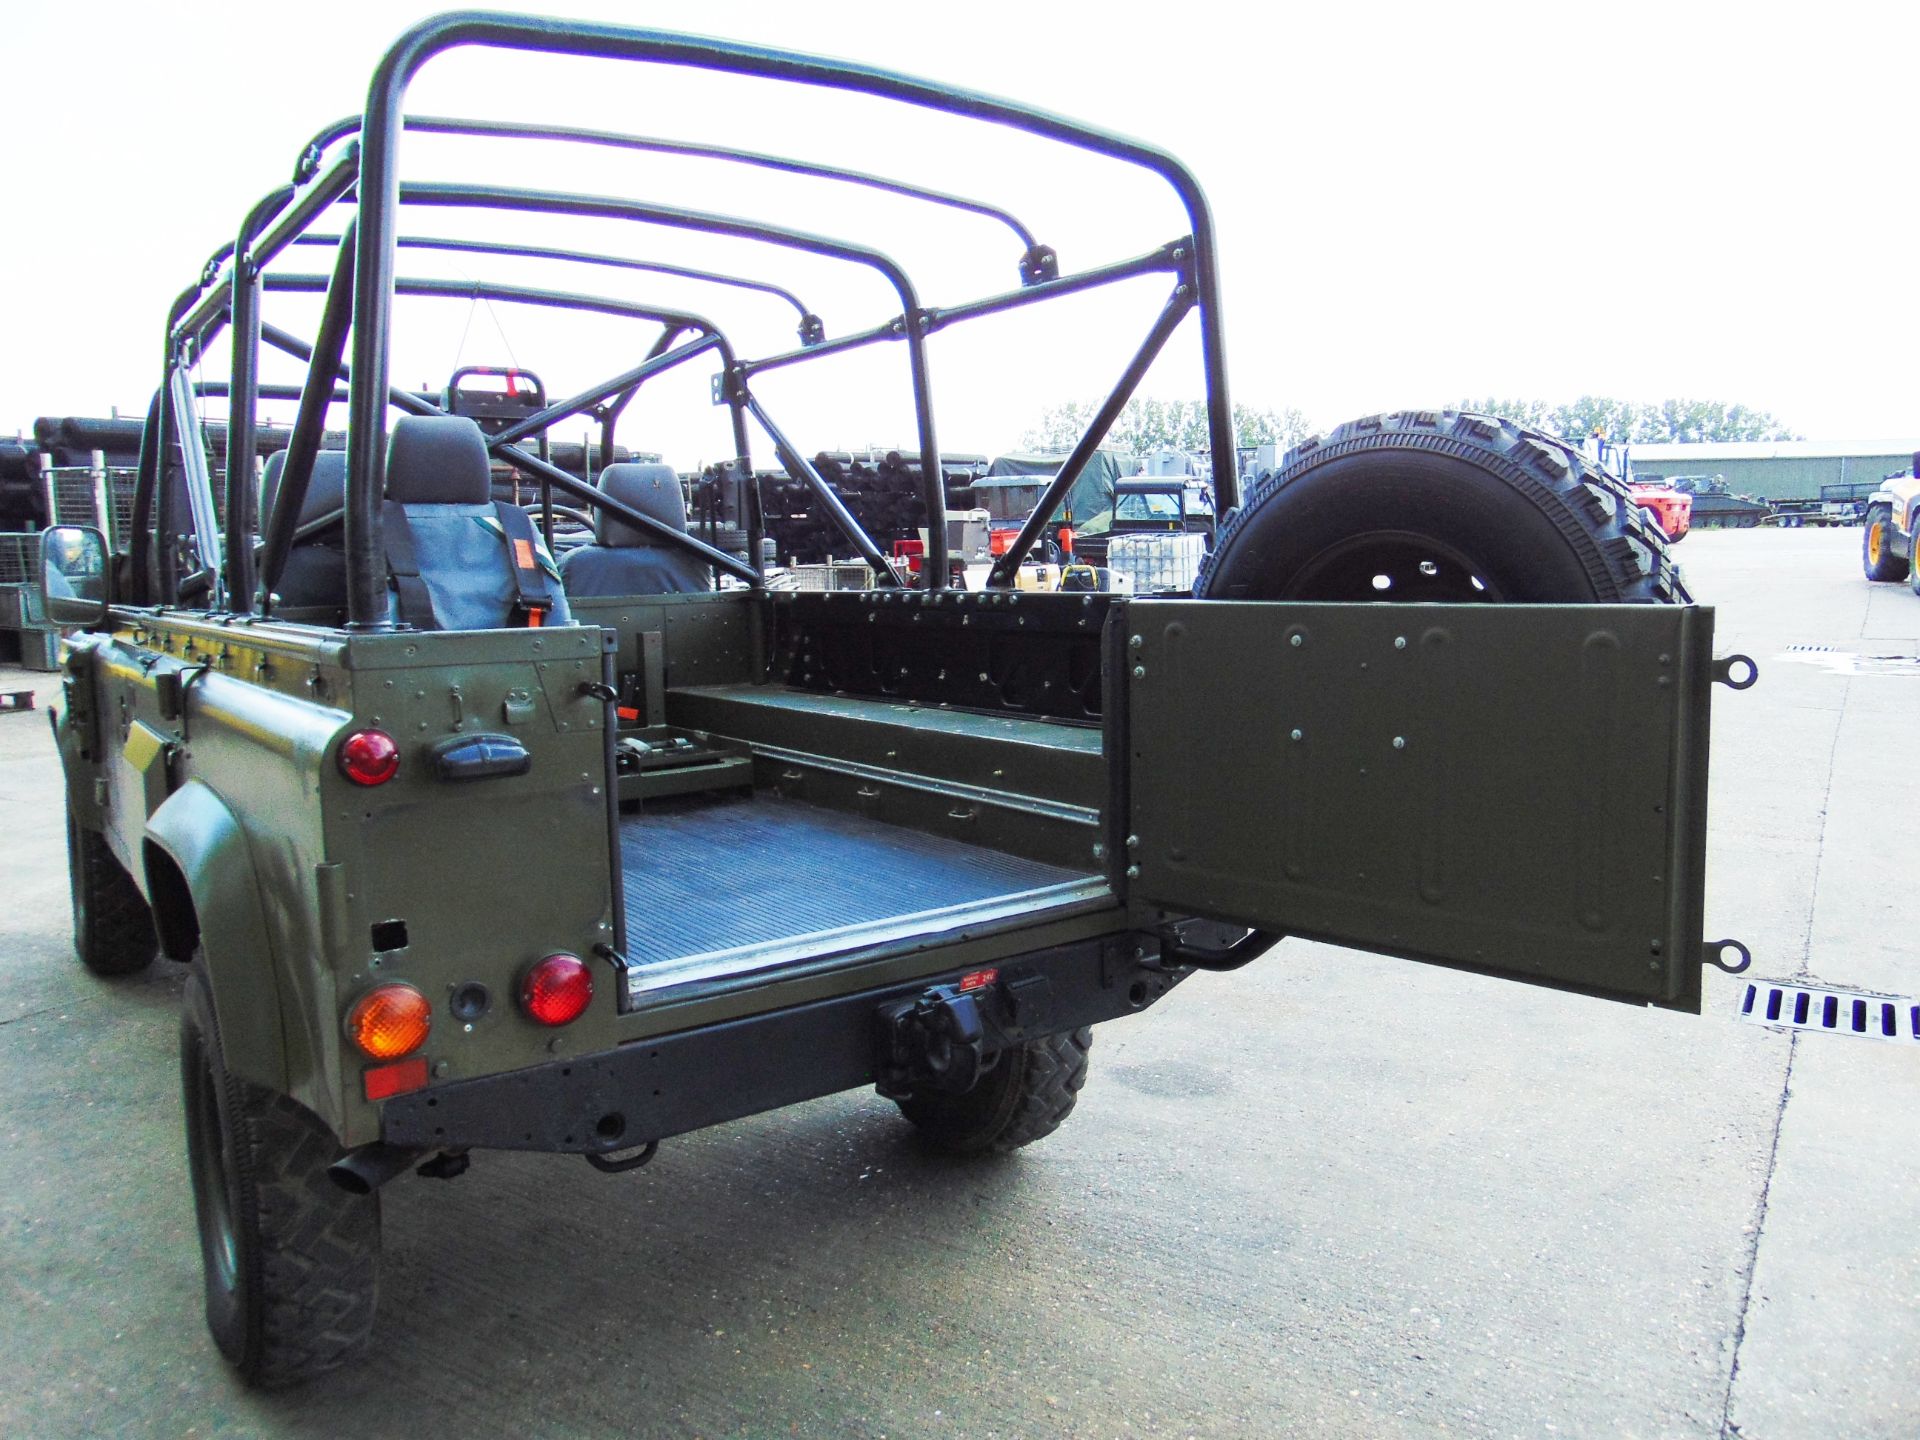 Land Rover Defender Wolf 110 Scout vehicle 300 Tdi - Image 15 of 37